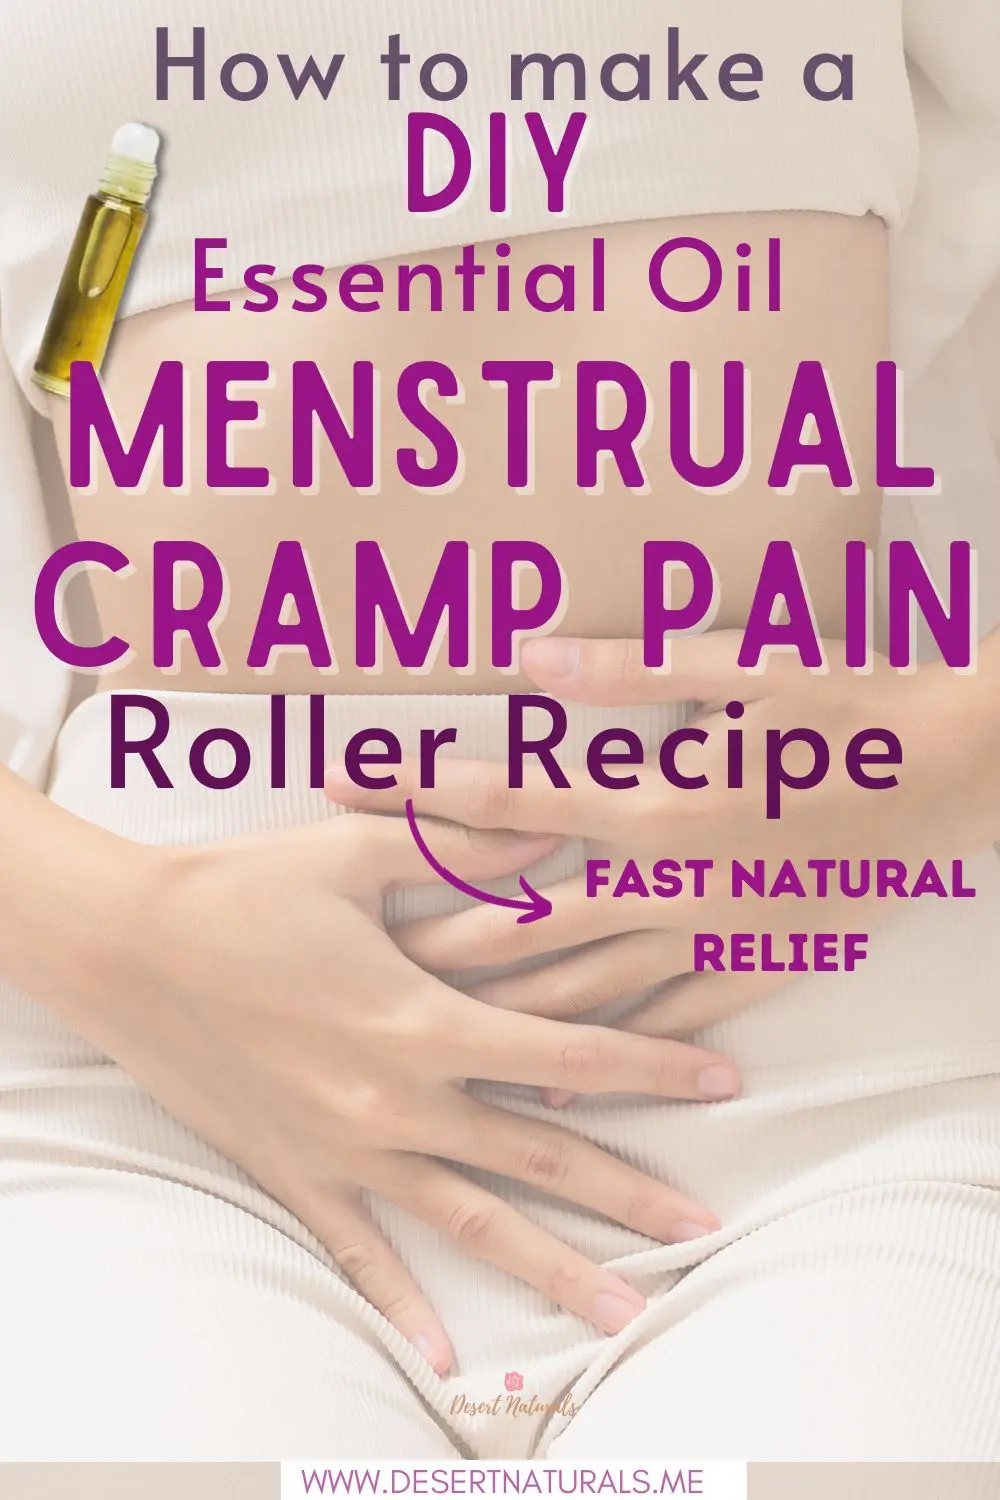 photo of woman holding abdomen with text how to make diy essential oil menstrual cramp pain roller recipe for fast natural relief